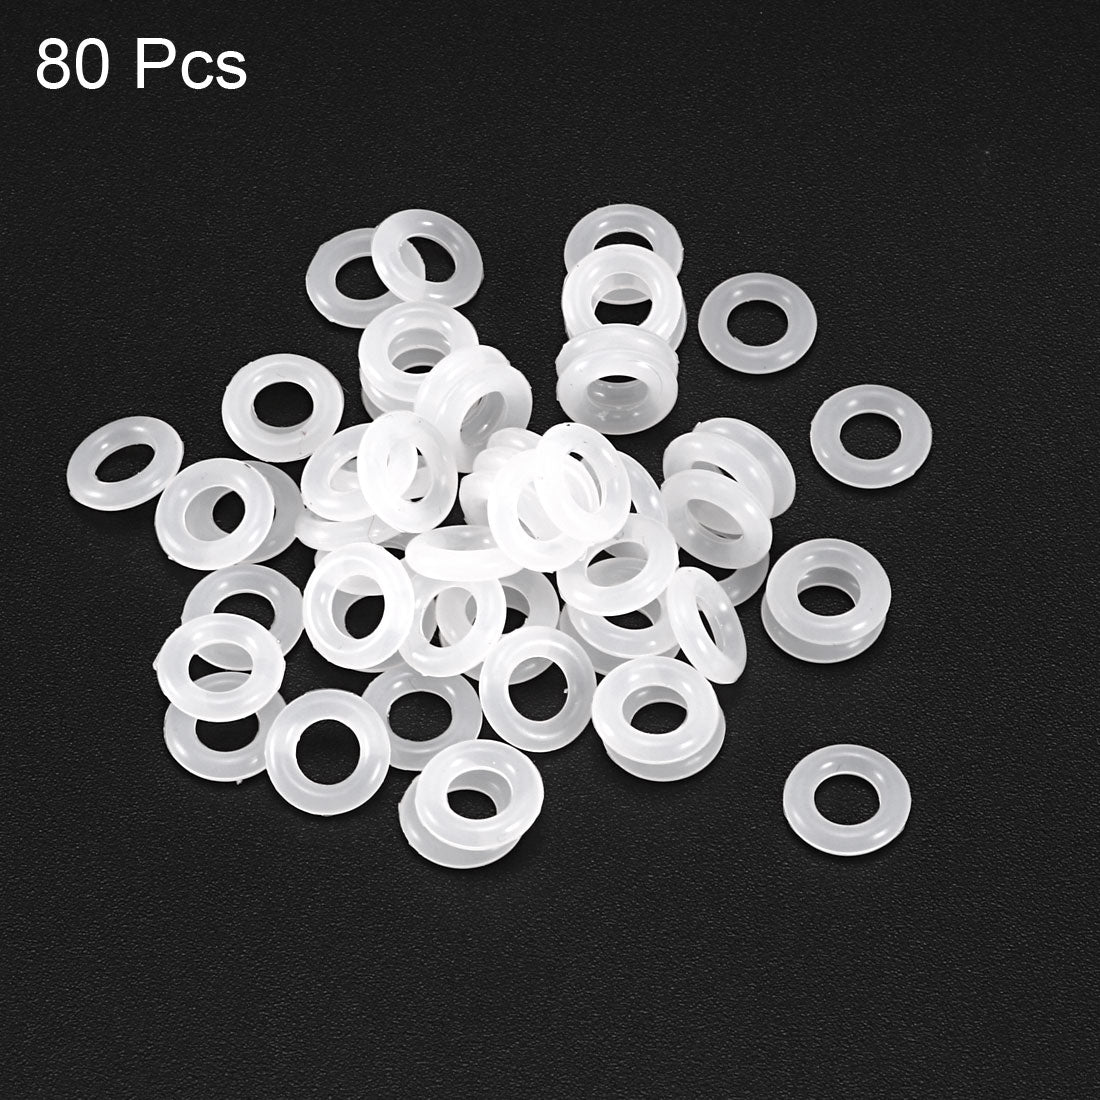 uxcell Uxcell Pneumatic Pump Fittings Gasket Silicone Sealing O Rings 4mm x 8mm x 2mm 80 Pcs